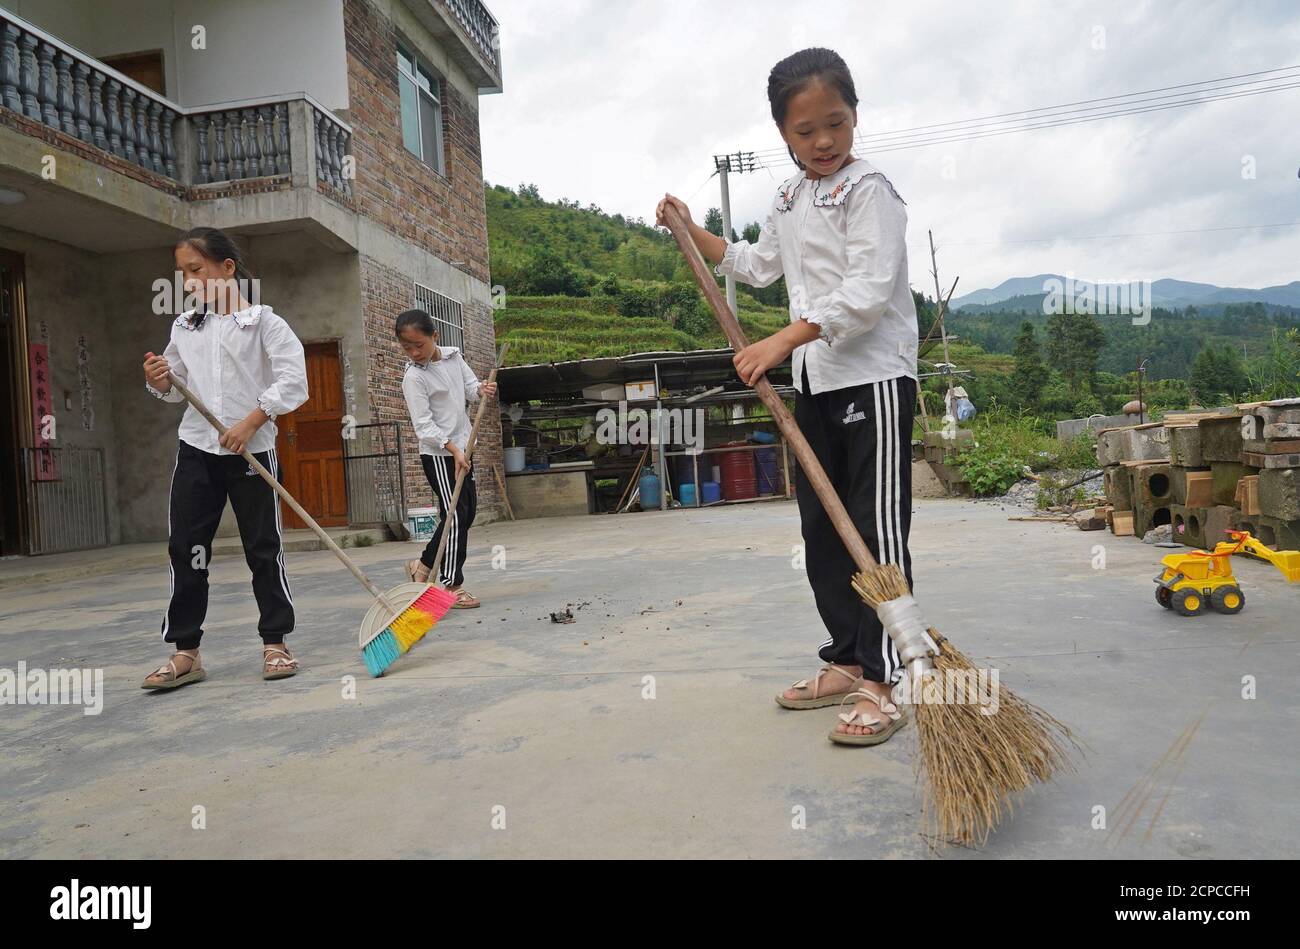 (200919) -- GANZHOU, Sept. 19, 2020 (Xinhua) -- The quadruplet girls clean the yard at home in Shangbao Village, Ganzhou City of east China's Jiangxi Province, Sept. 10, 2020. Wu Nianyou, a farmer in Shangbao Village of Ganzhou City, and his wife saw their quadruplet daughters come to the world on a morning in September 2010. They named their daughters Wu Mengling, Wu Mengting, Wu Mengyun and Wu Mengqin, who became their worry to raise up with little income only from the fields. Being premature babies, the girls were in poor health conditions which needed lots of money to treat. With the help Stock Photo